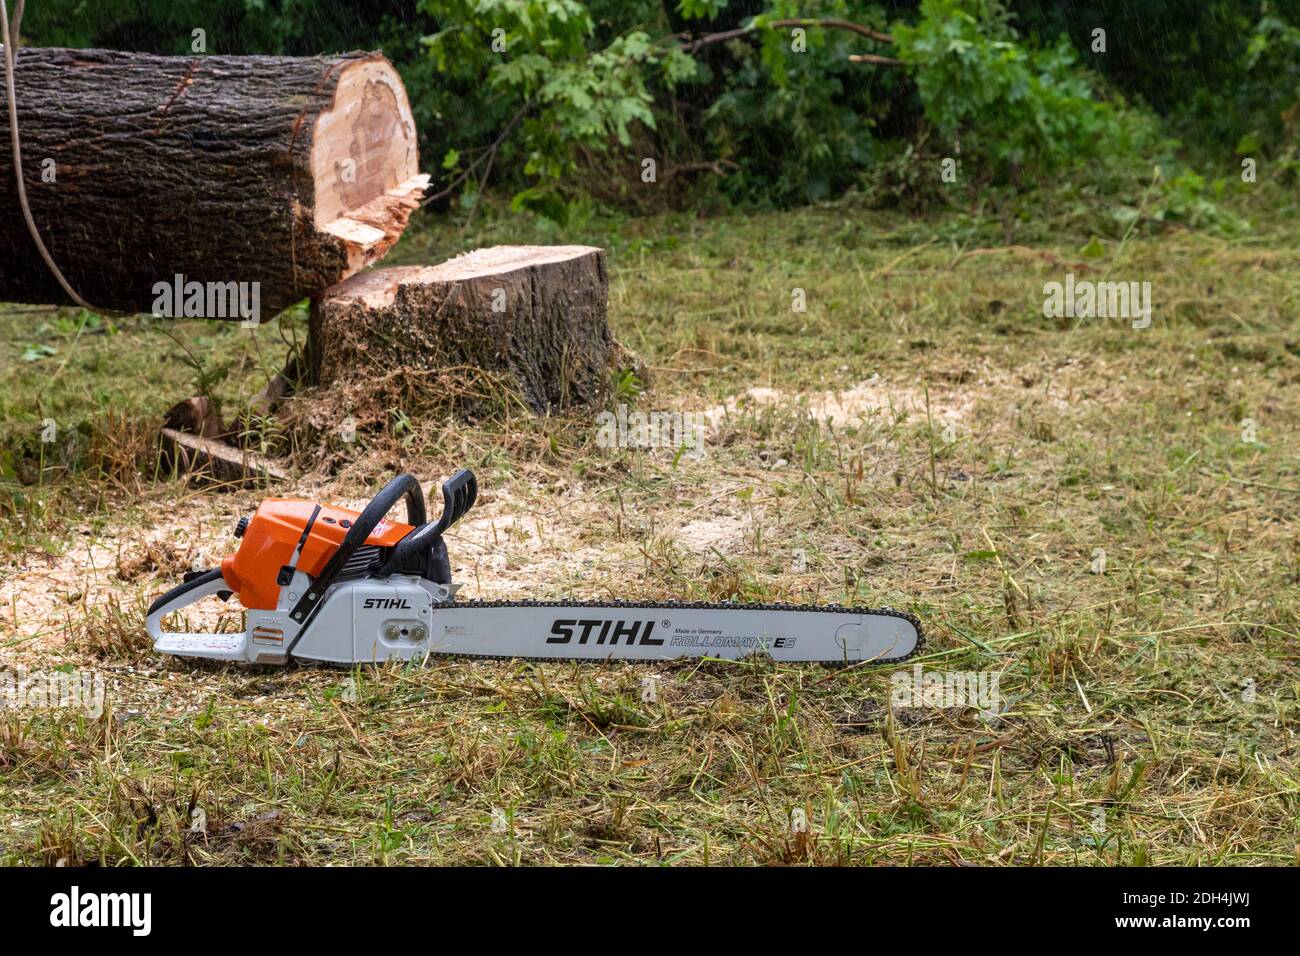 Flint, Michigan - A chain saw used by workers from the Michigan Grounds Crew, who participated in a community cleanup of vacant lots. Stock Photo